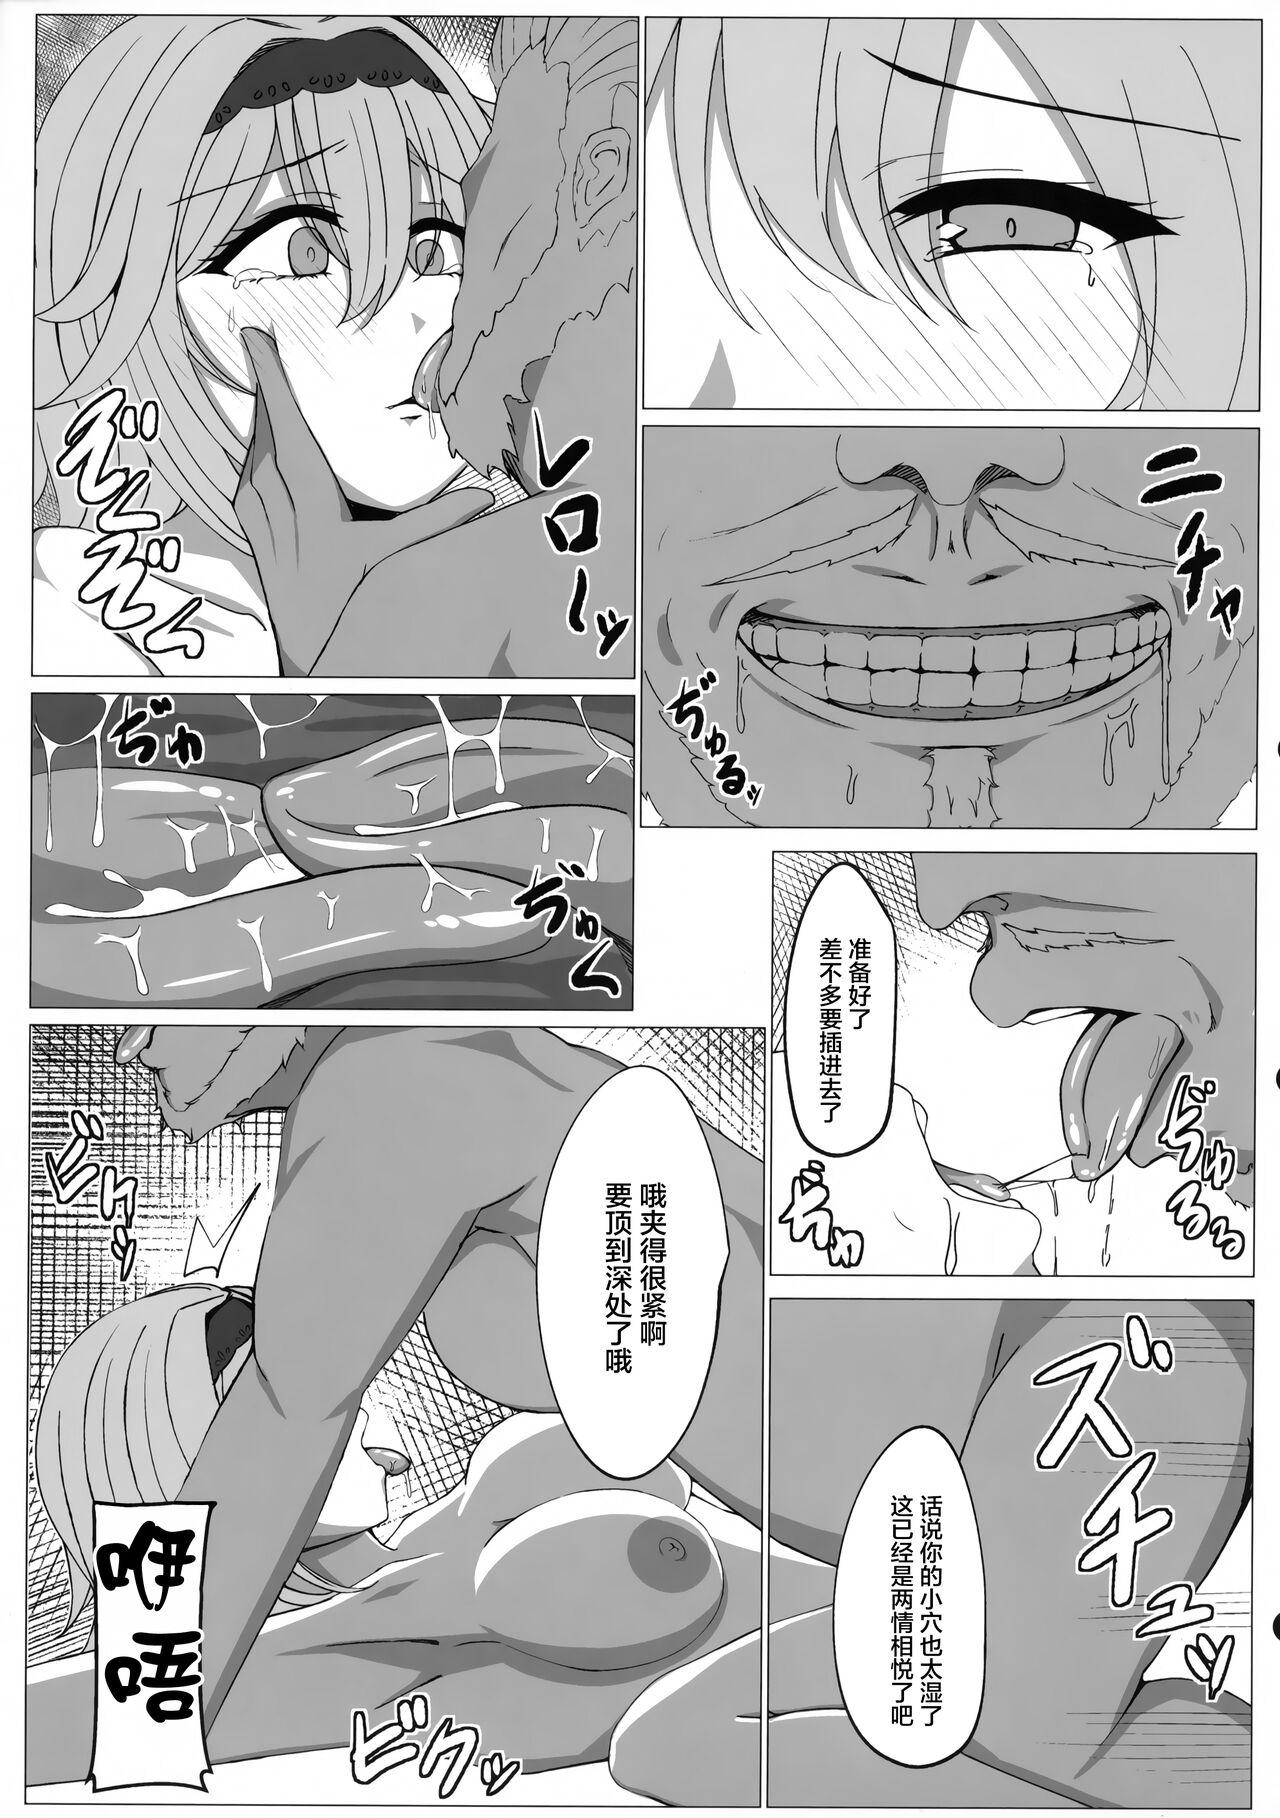 Oralsex COLLAPSE DAY - Genshin impact Creampies - Page 10